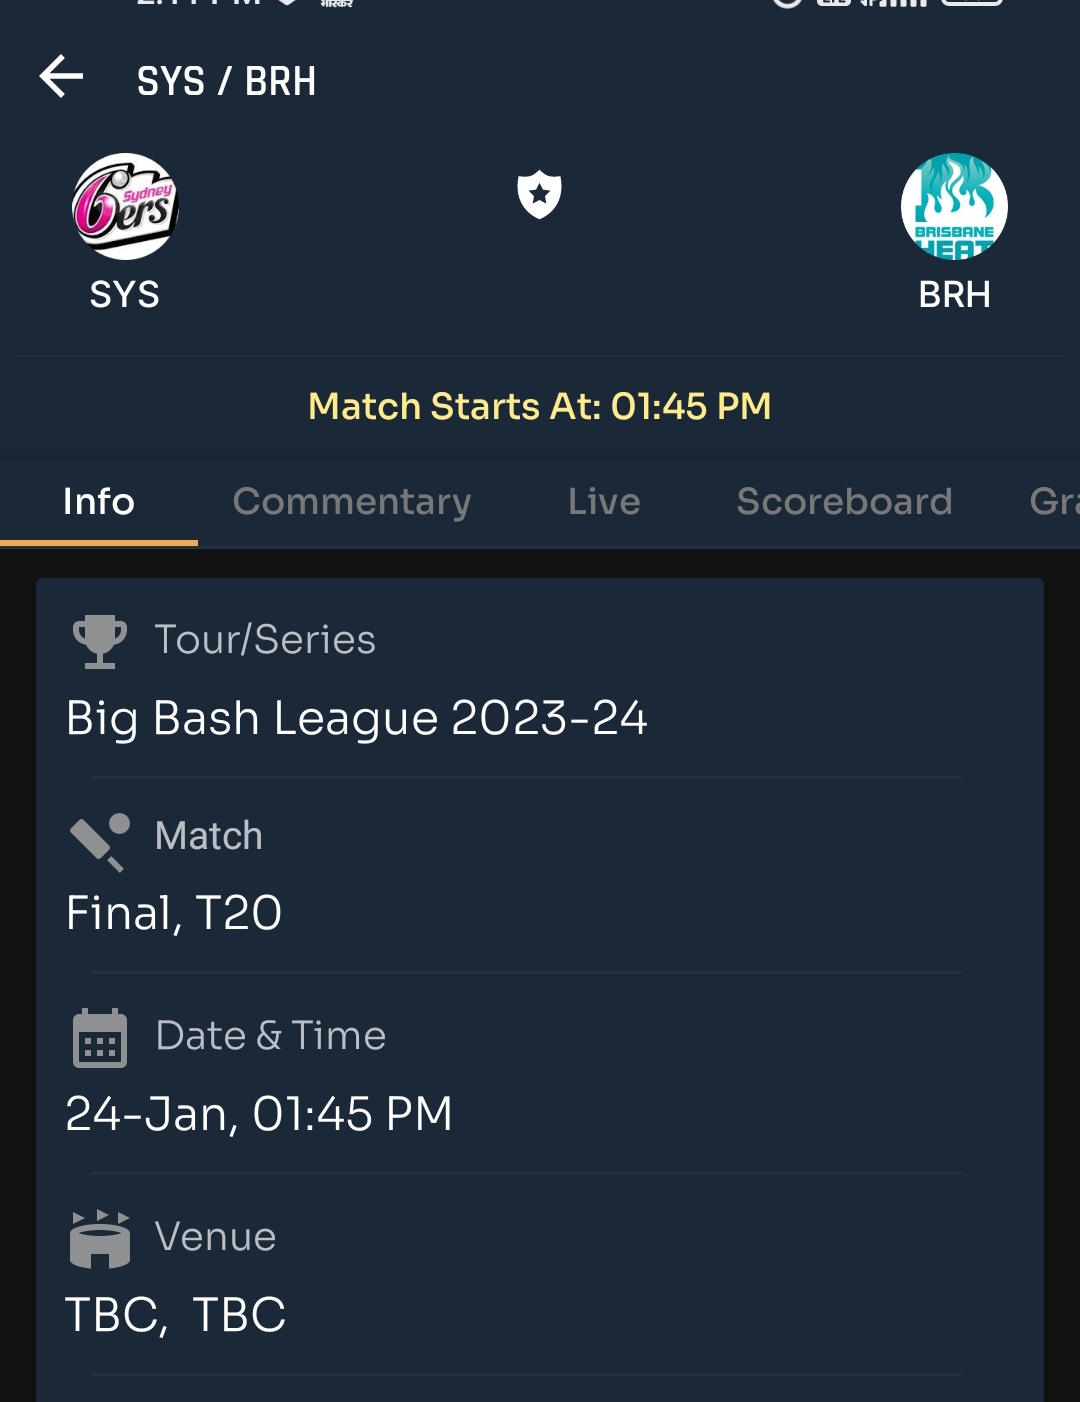 Today BBL Final Match Prediction |BRH vs SYS| Toss and Match Analysis | Pitch & Weather Report